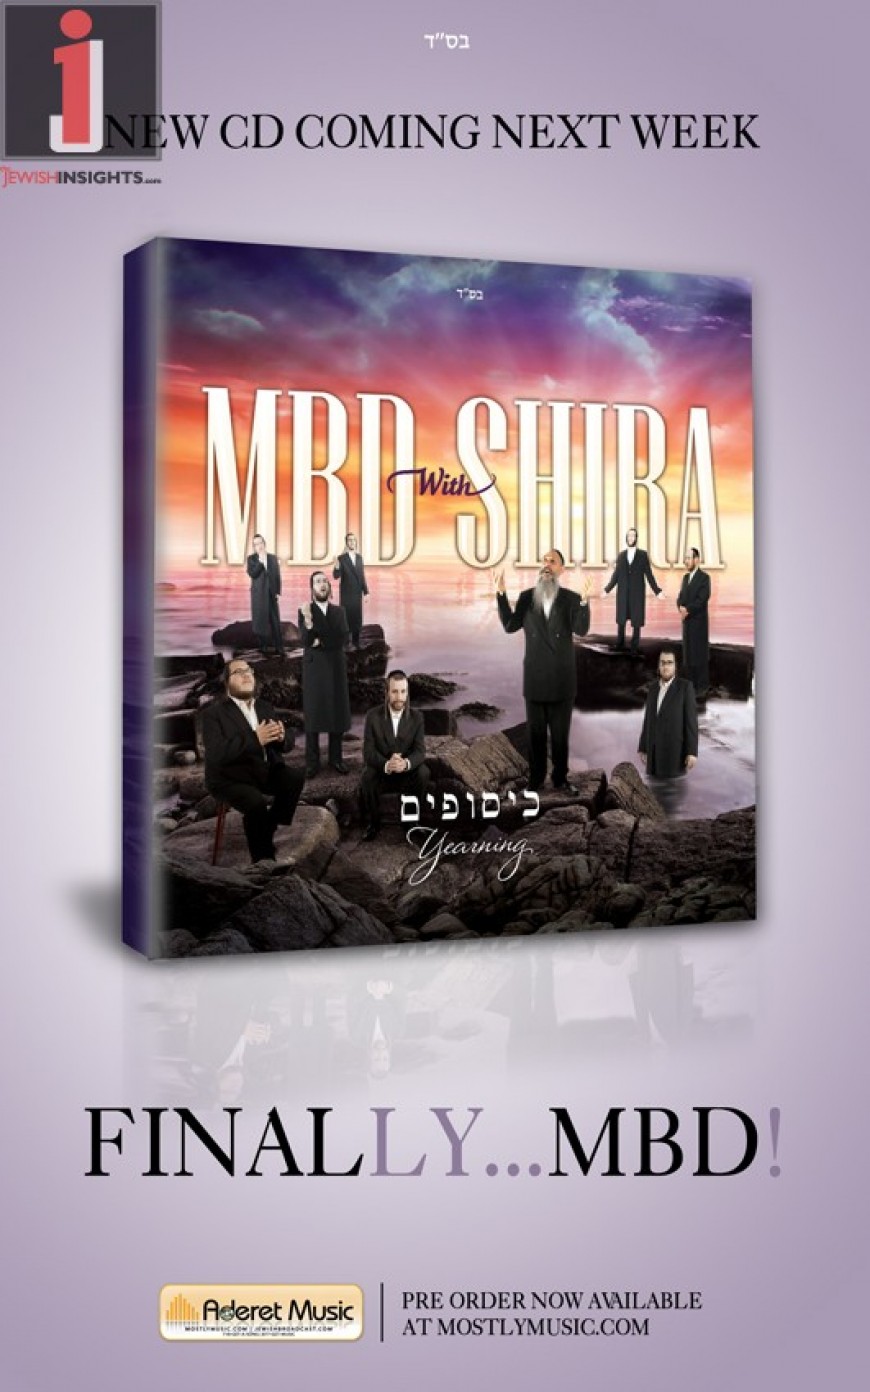 In Exclusive VIN Interview King Of Jewish Music MBD Says New Release Will Be Final Album